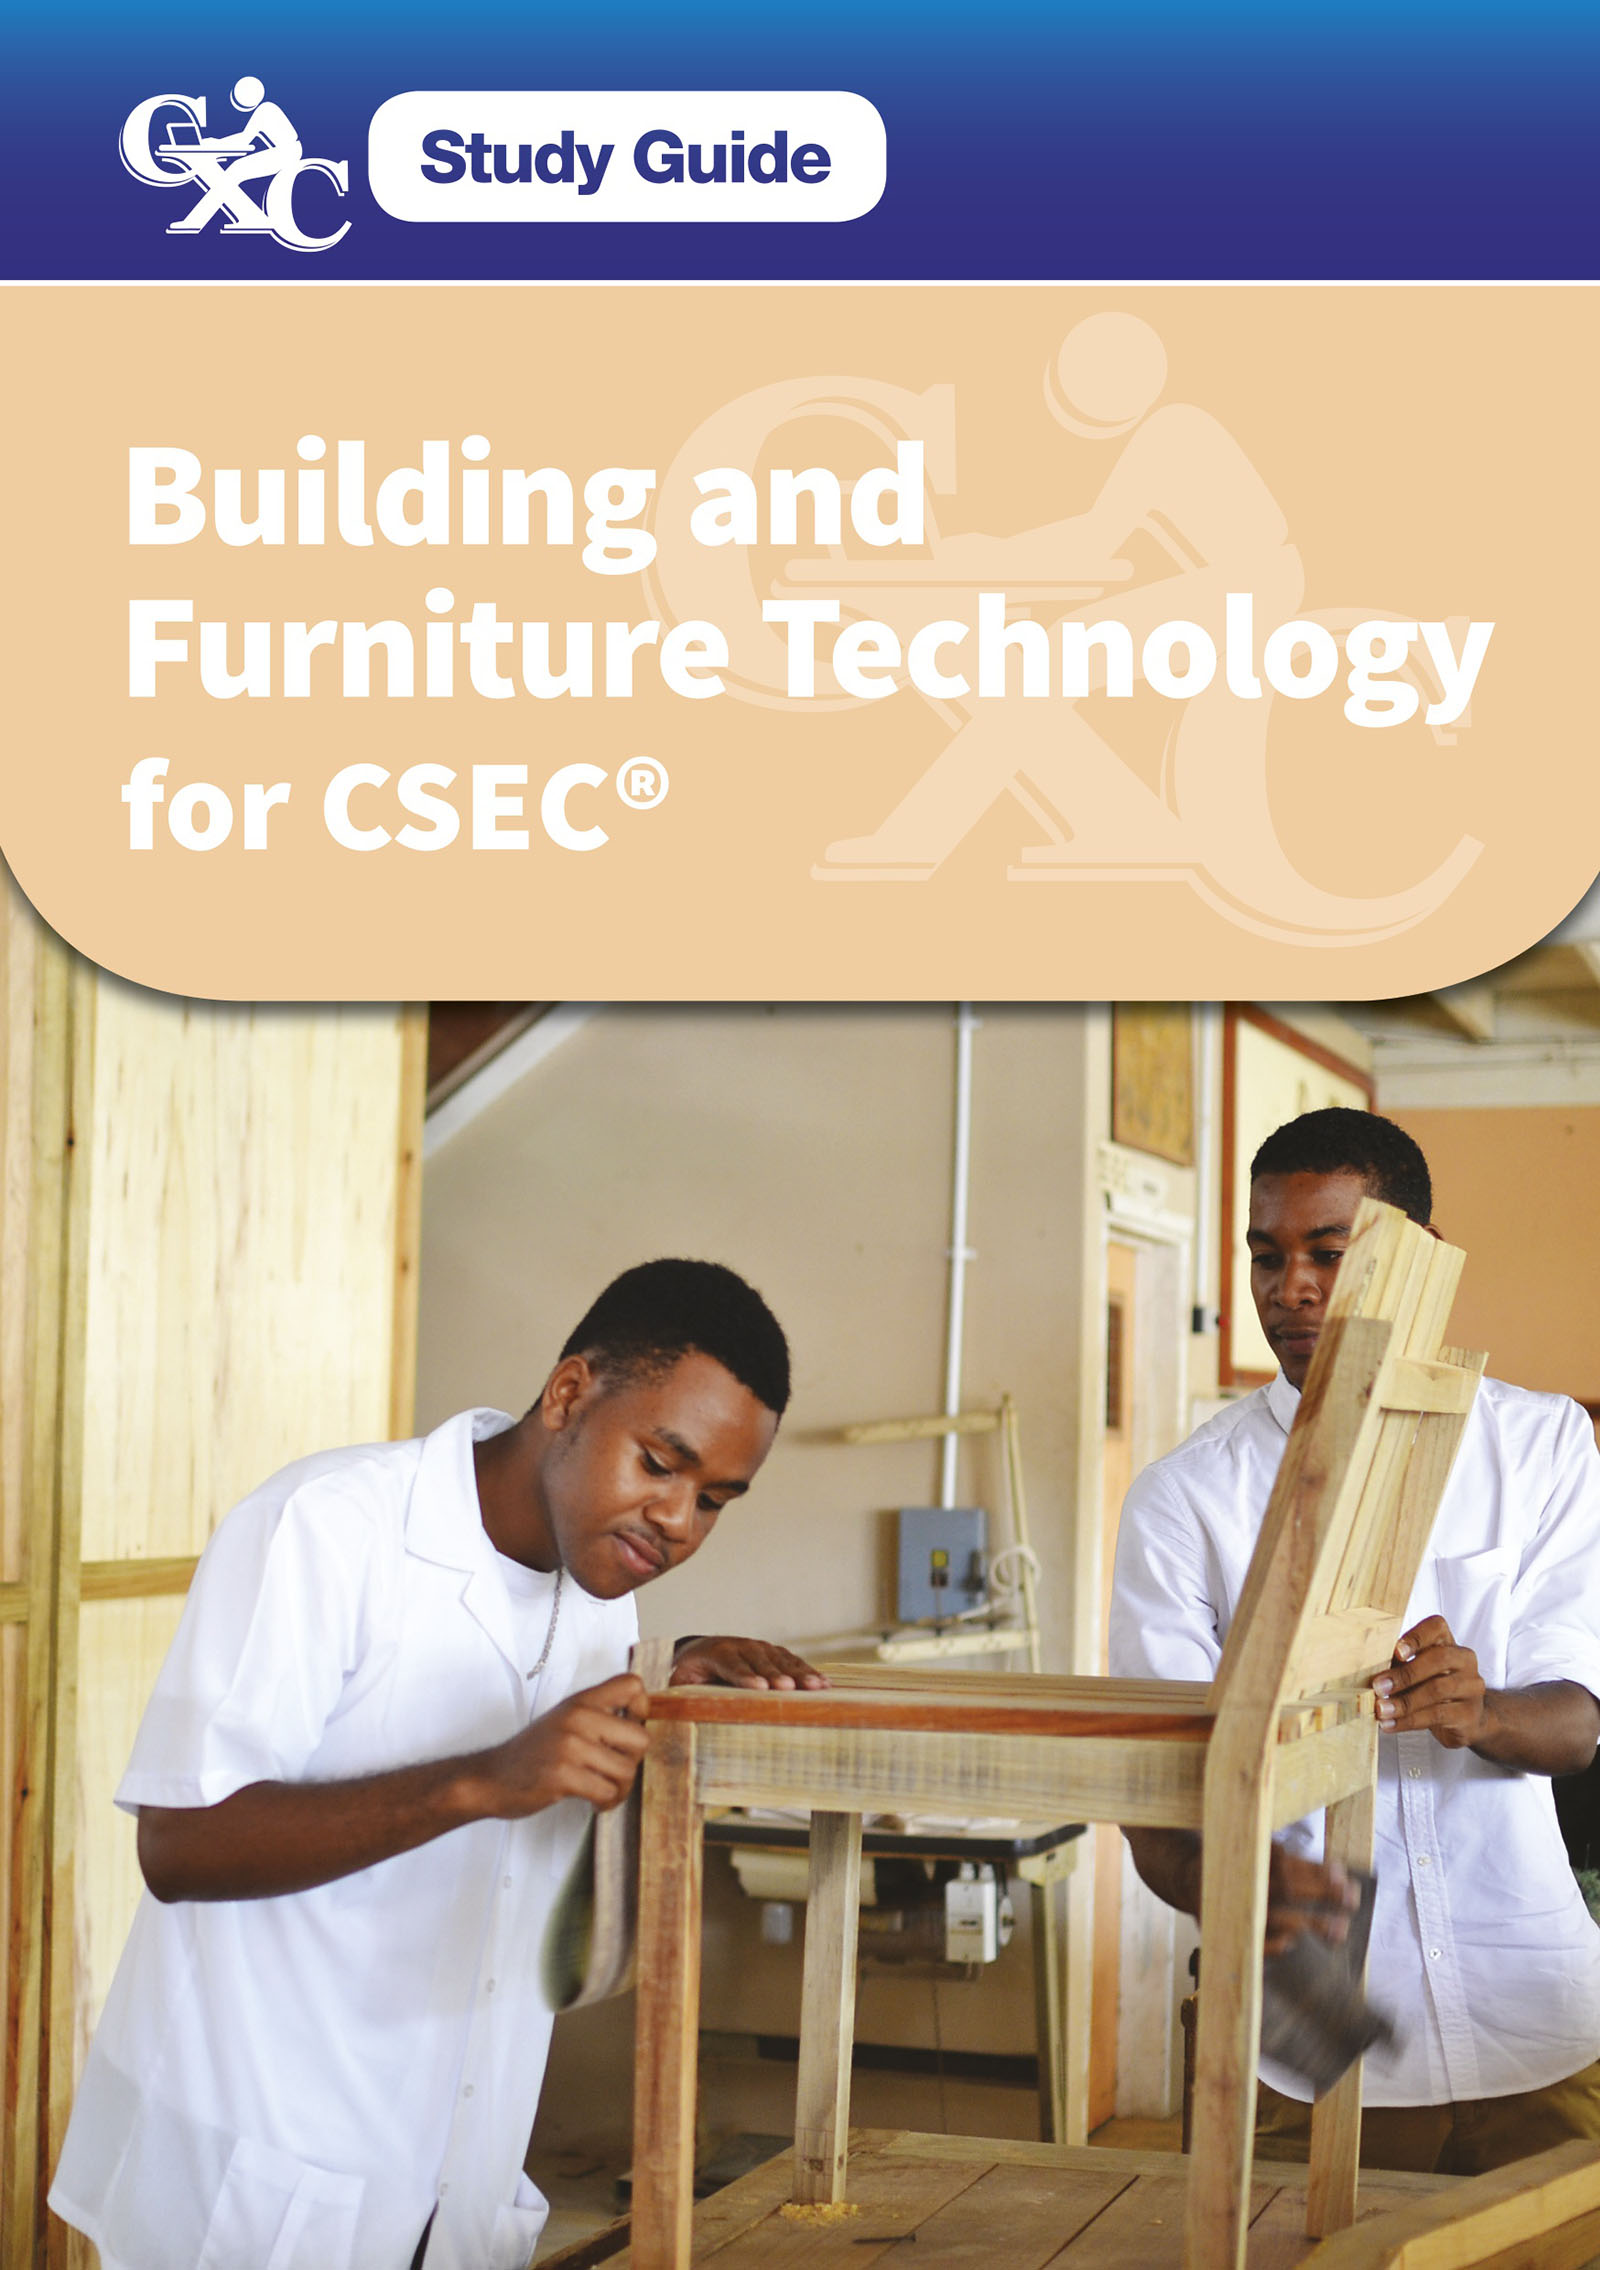 Cxc Study Guide Building And Furniture Technology For Csec Digital